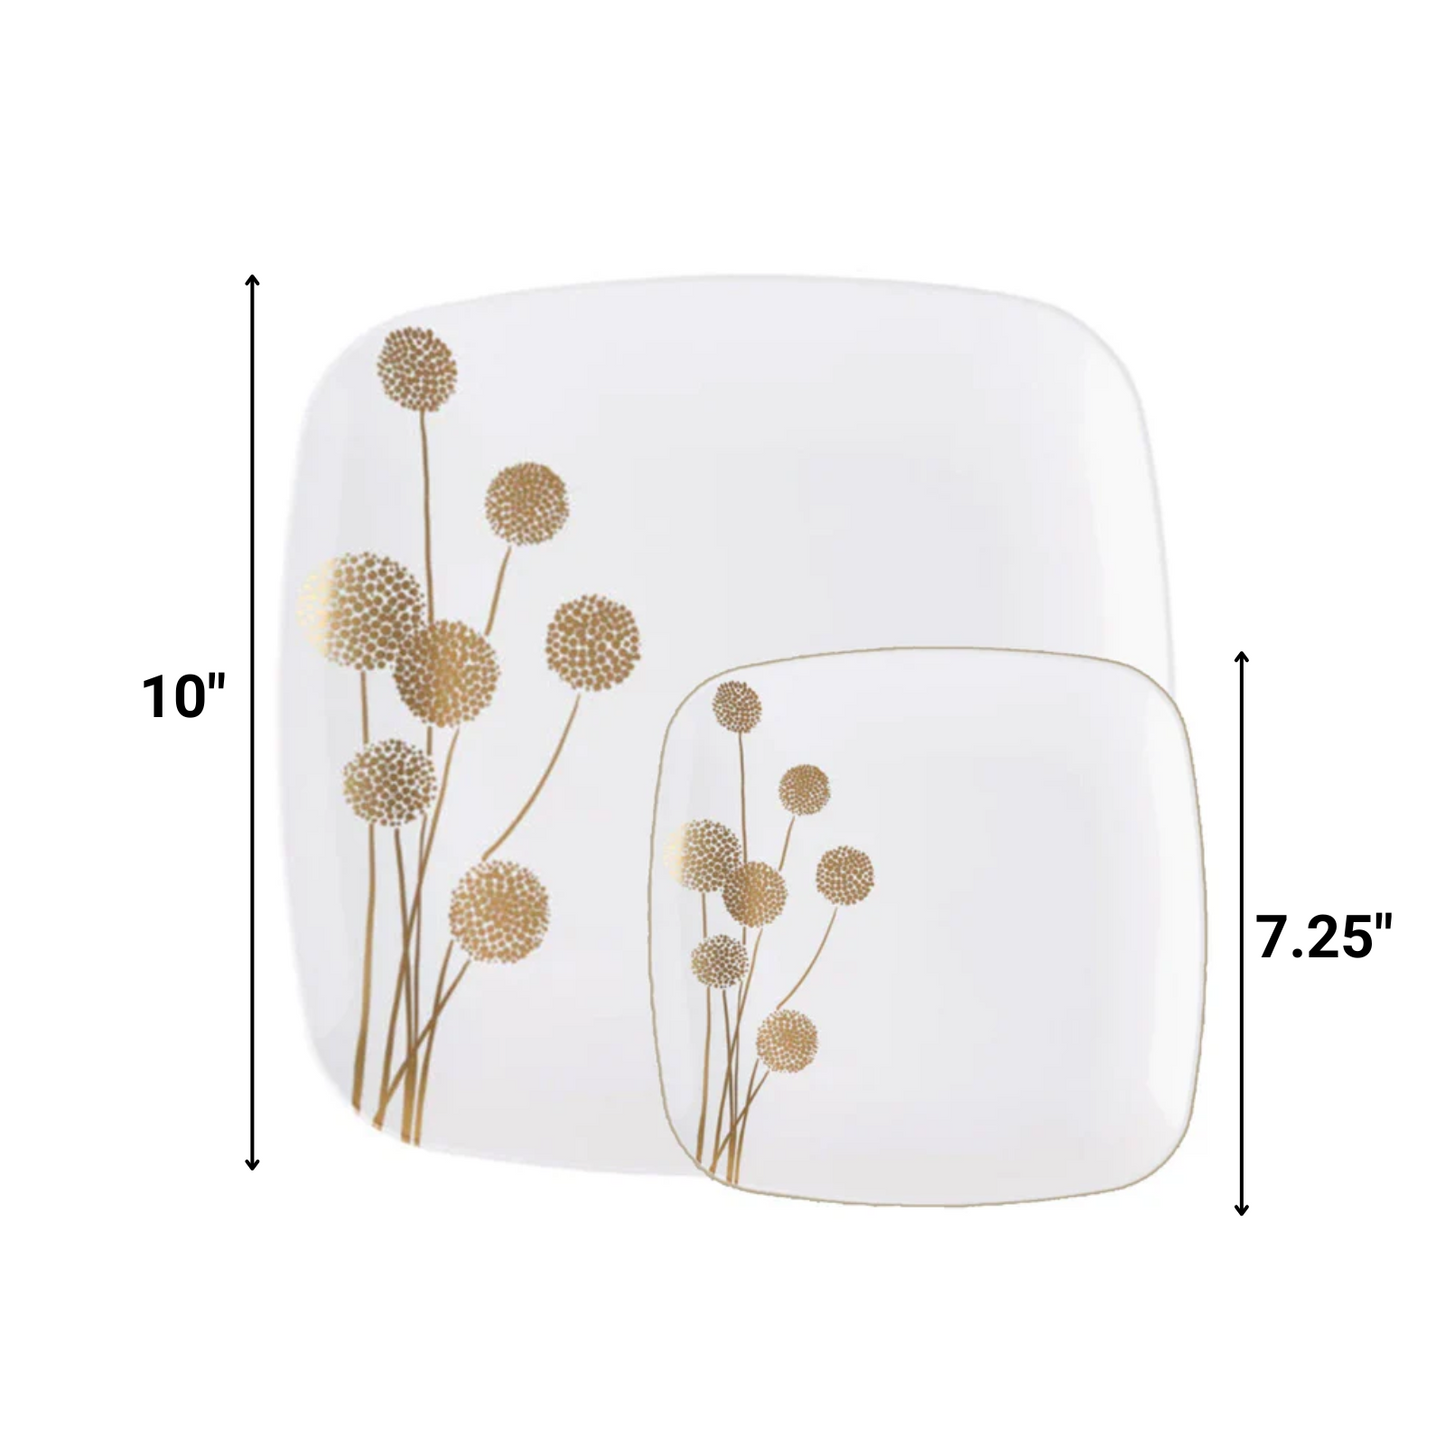 COMBO Gold and White Plastic Dandelion Square Plates 10″  Fancy Disposable - Tableware Package